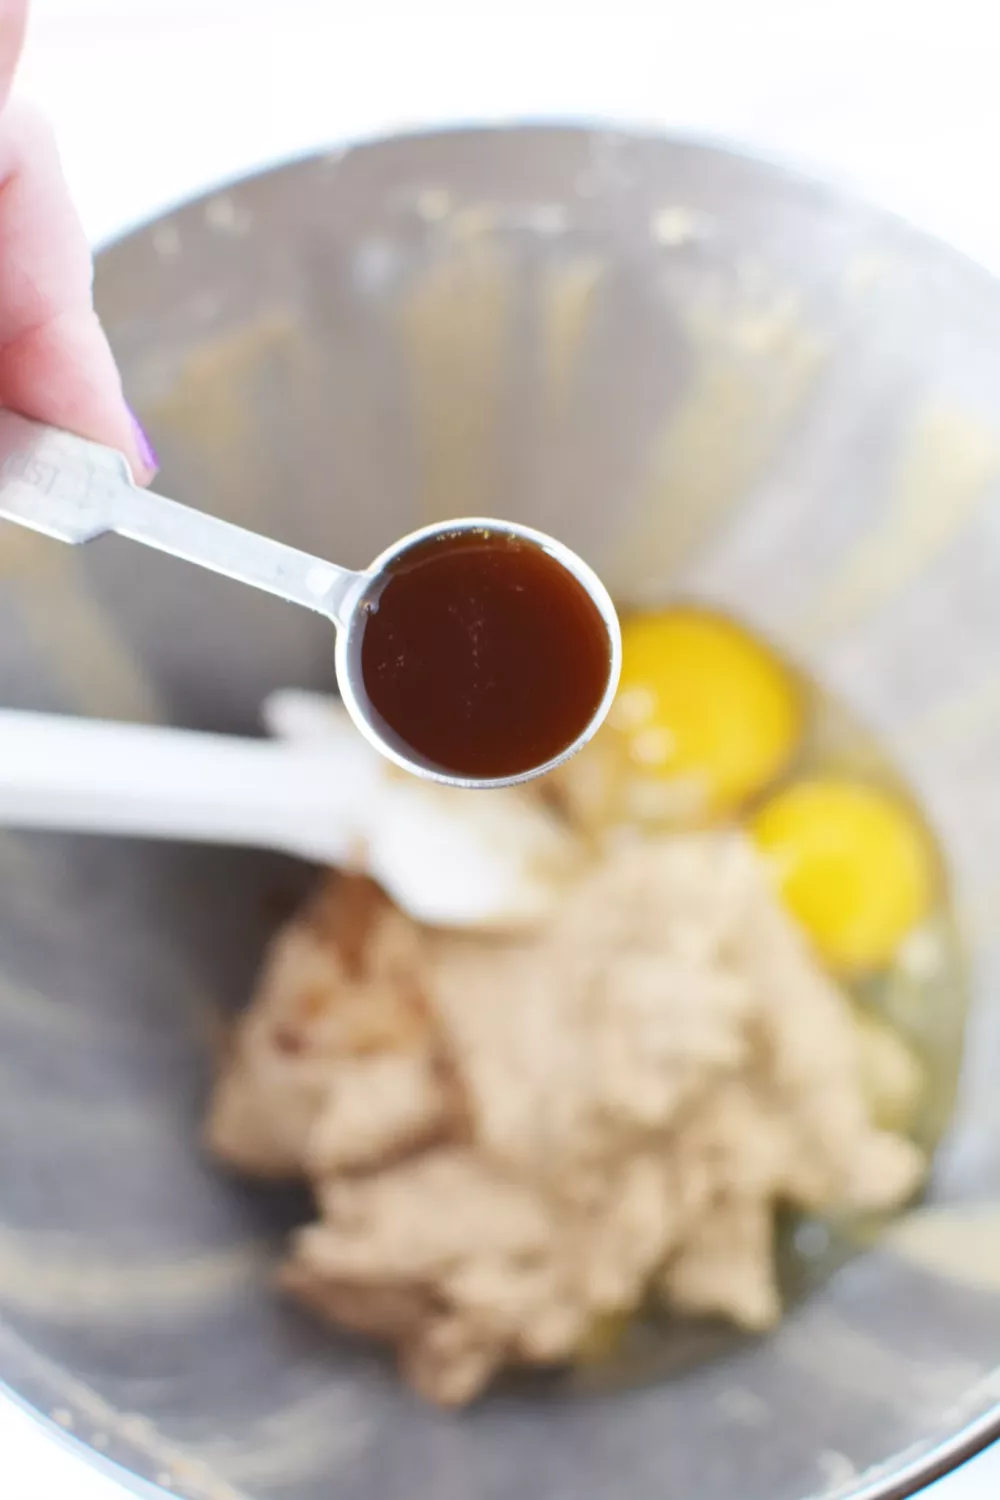 add in your eggs and the pure vanilla extract and beat them together well until they are completely combined.